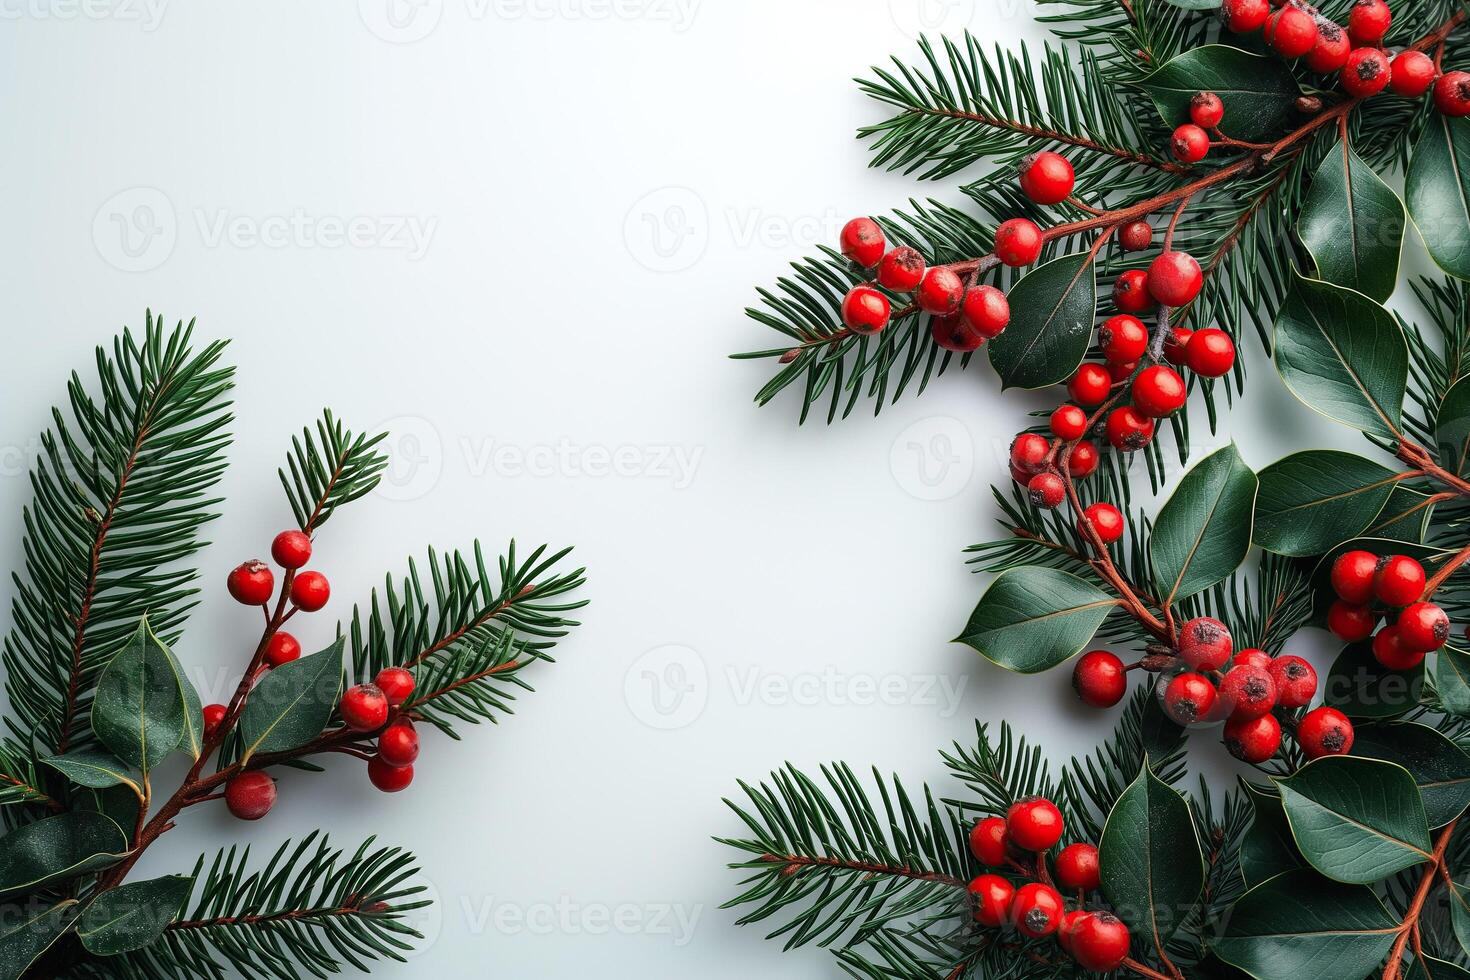 A white background with red berries and green leaves, Christmas banner design, empty space photo